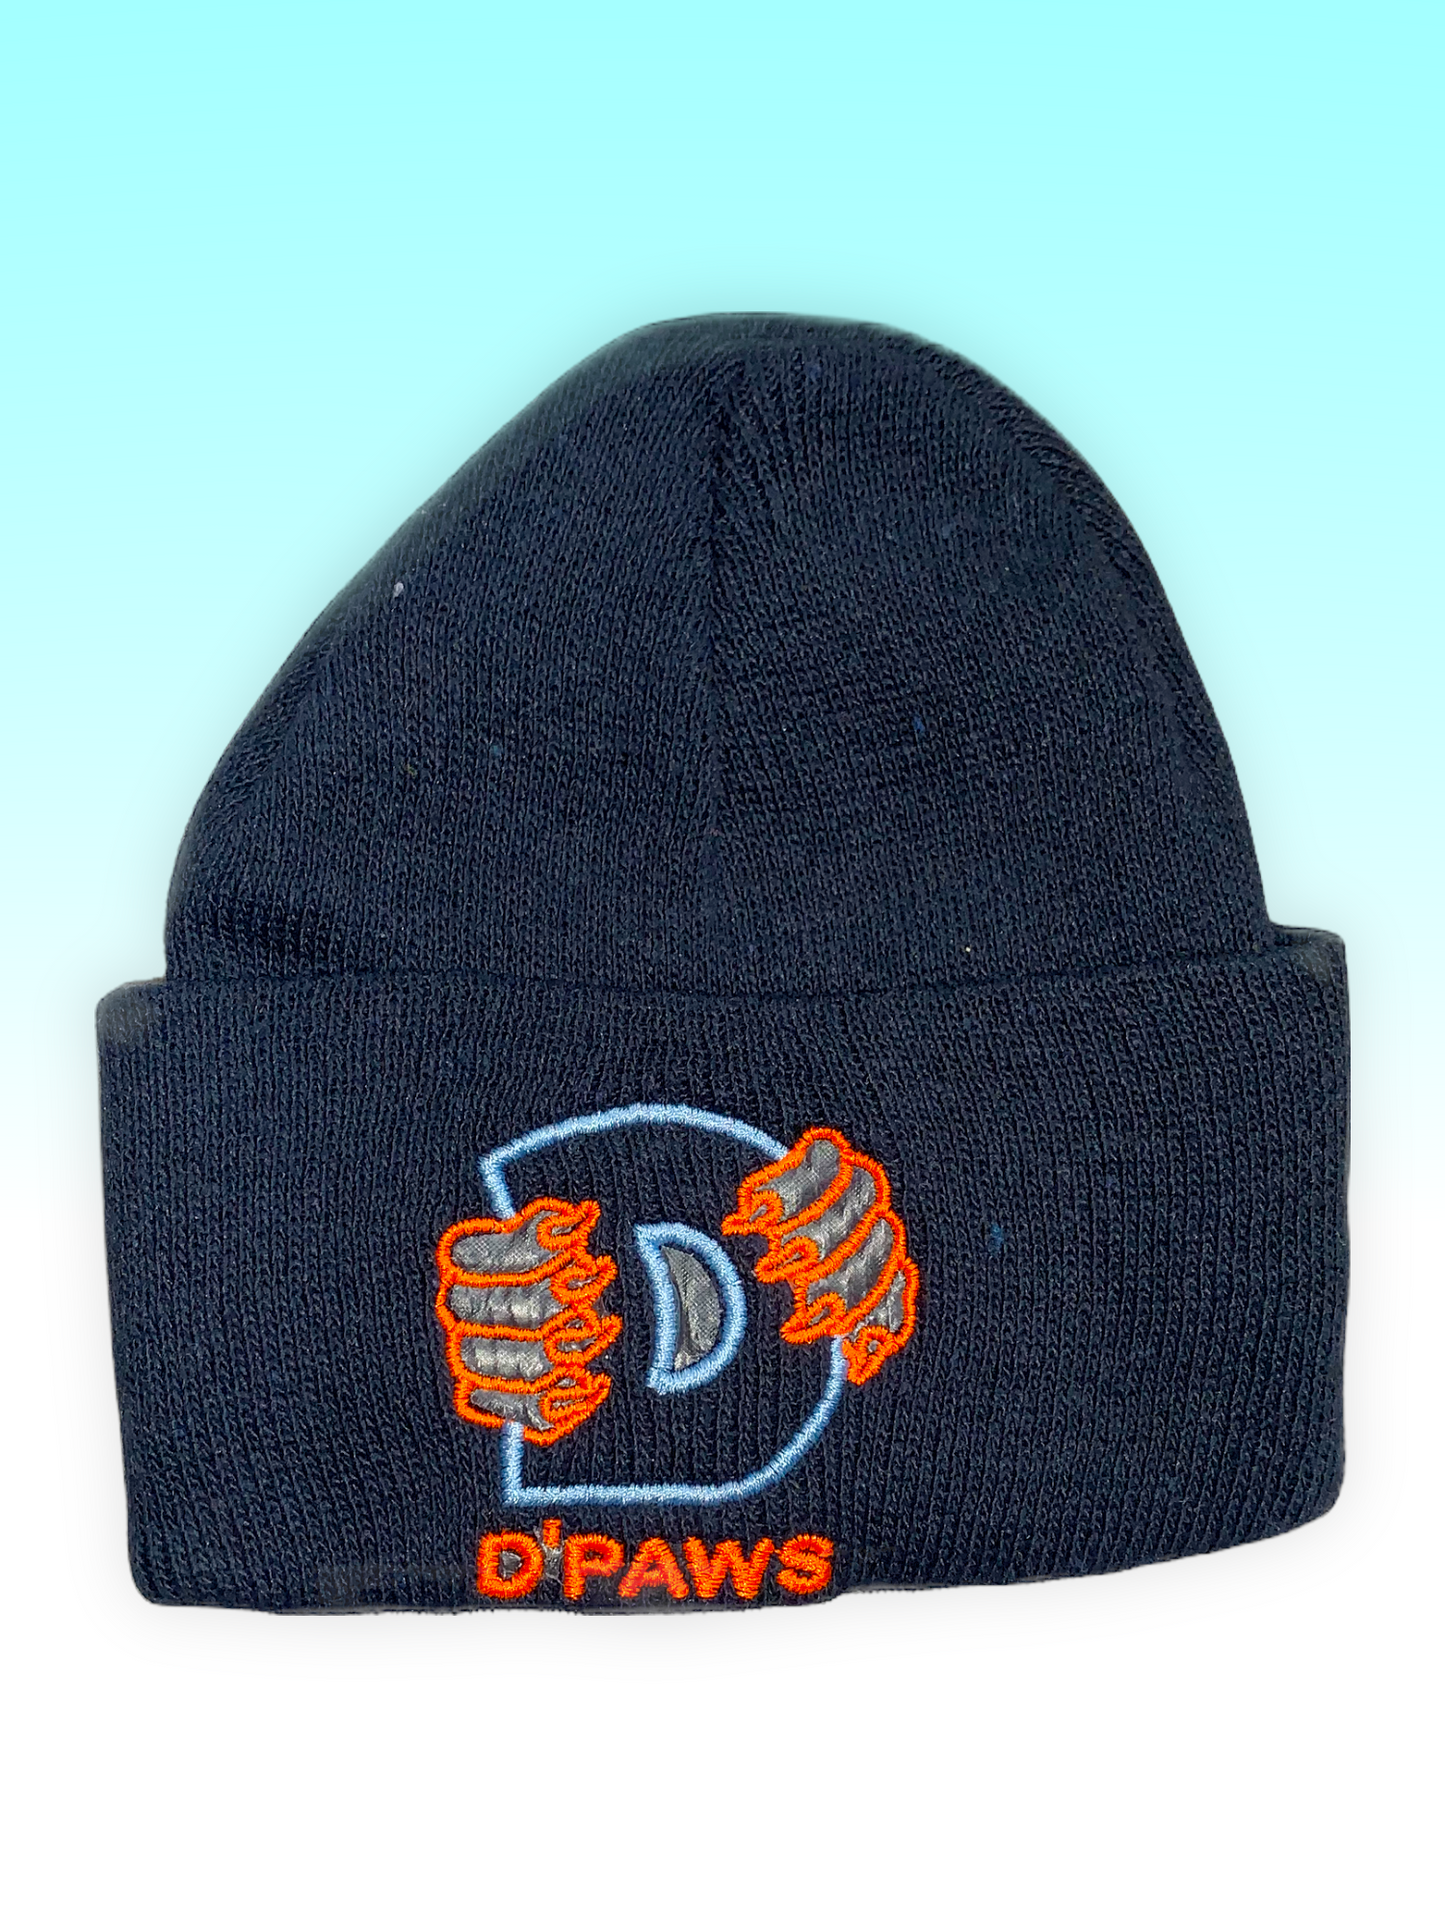 Navy Blue Beanies with Orange and Blue Embroidery